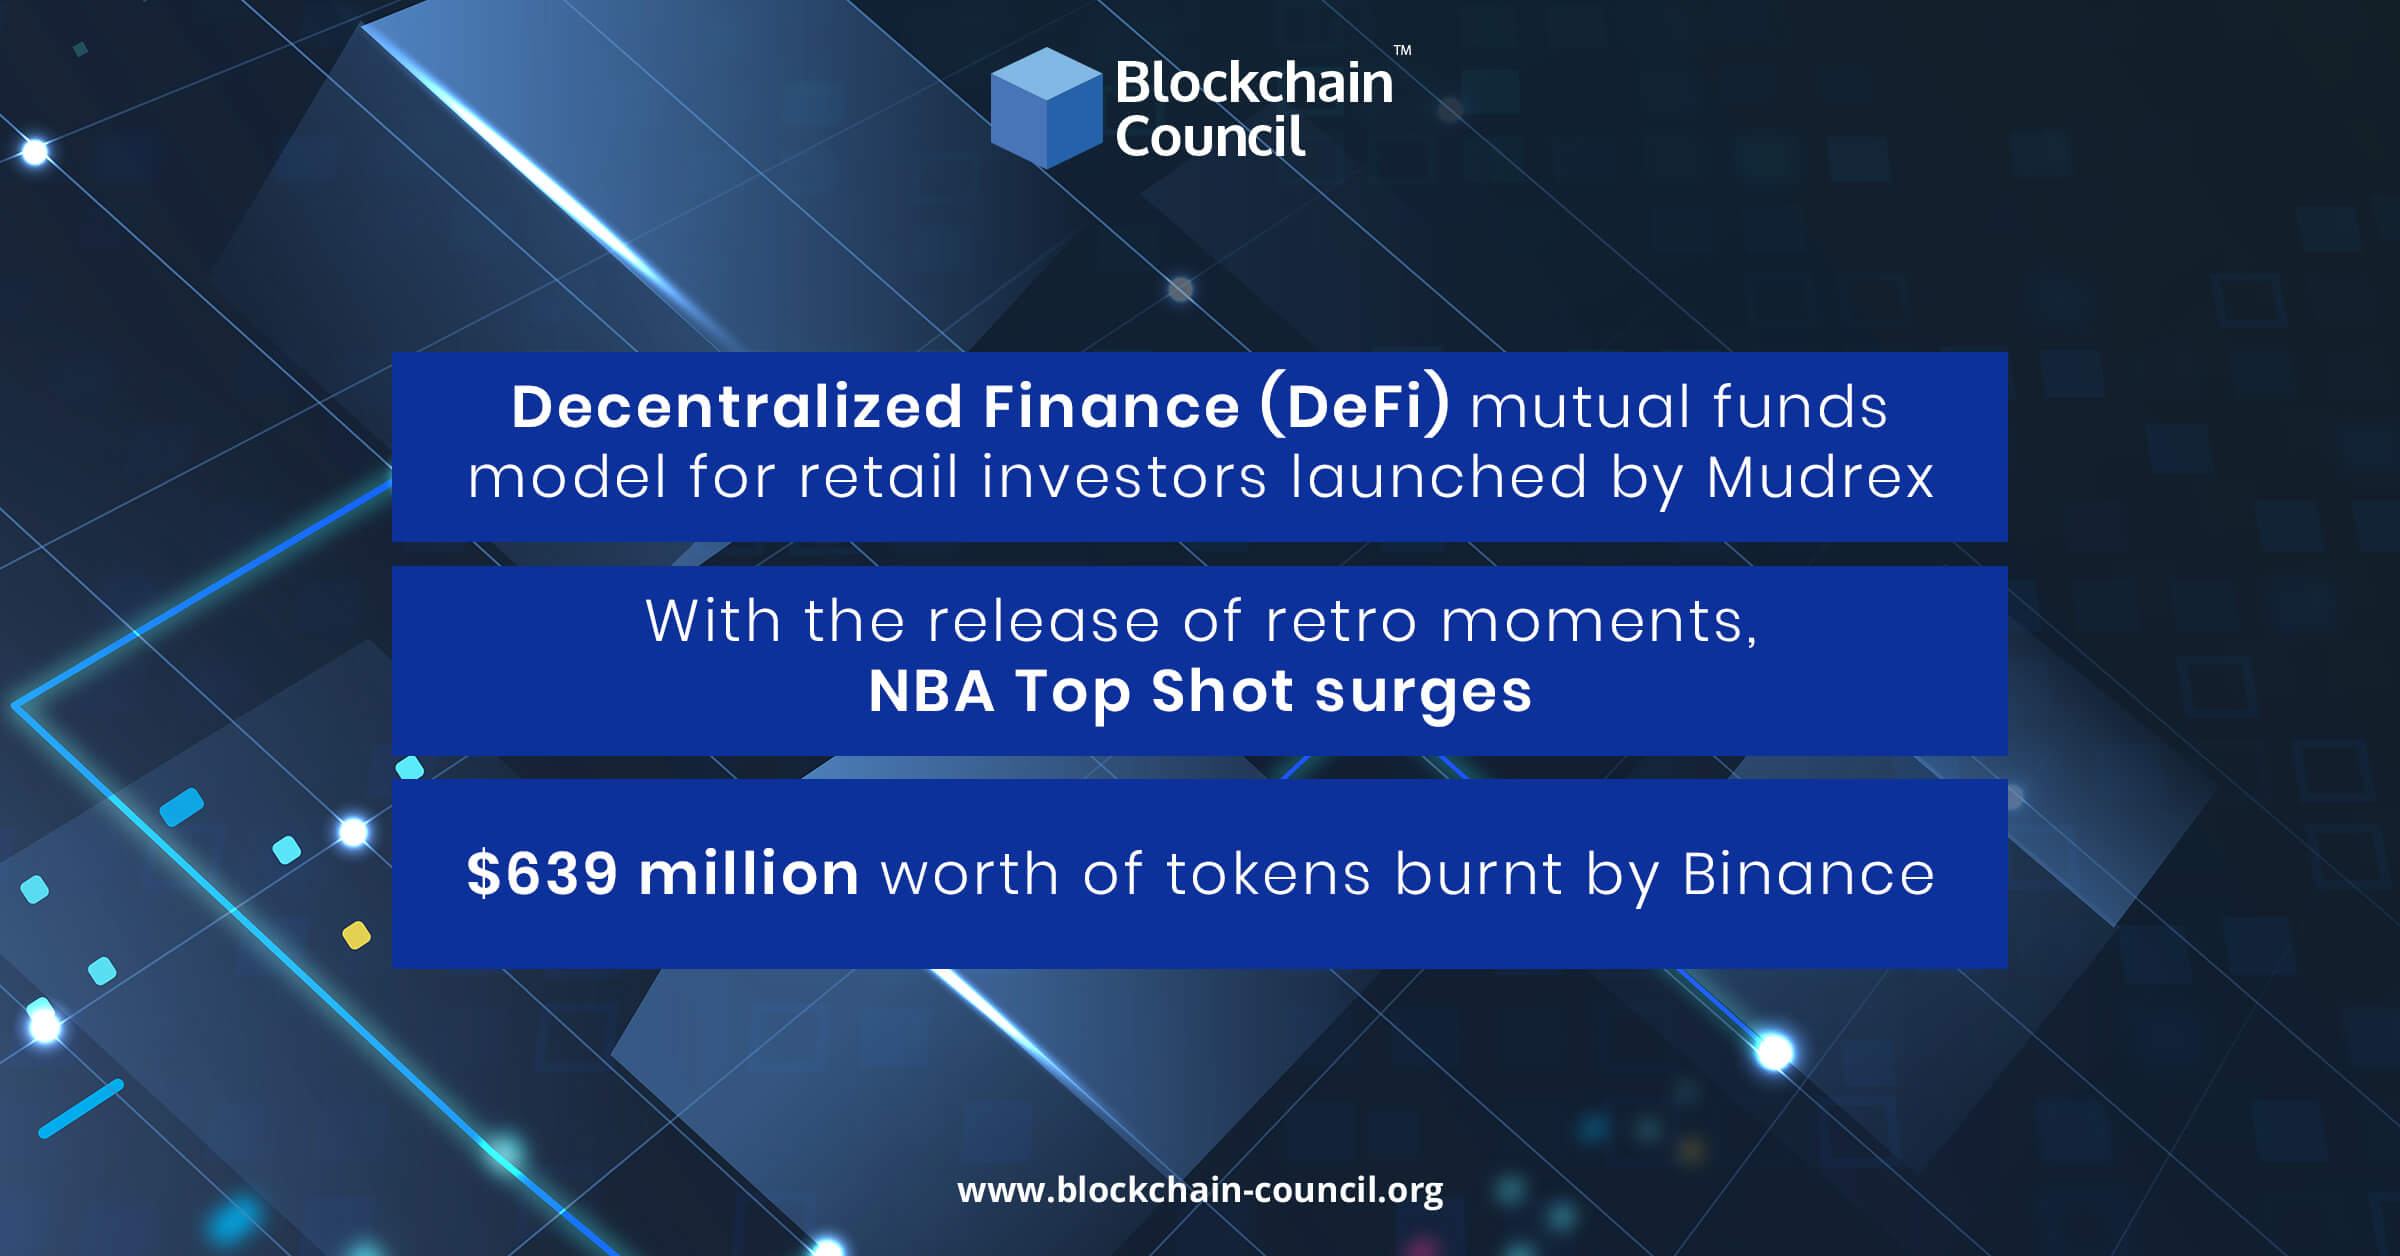 Decentralized Finance (DeFi) mutual funds model for retail investors launched by Mudrex